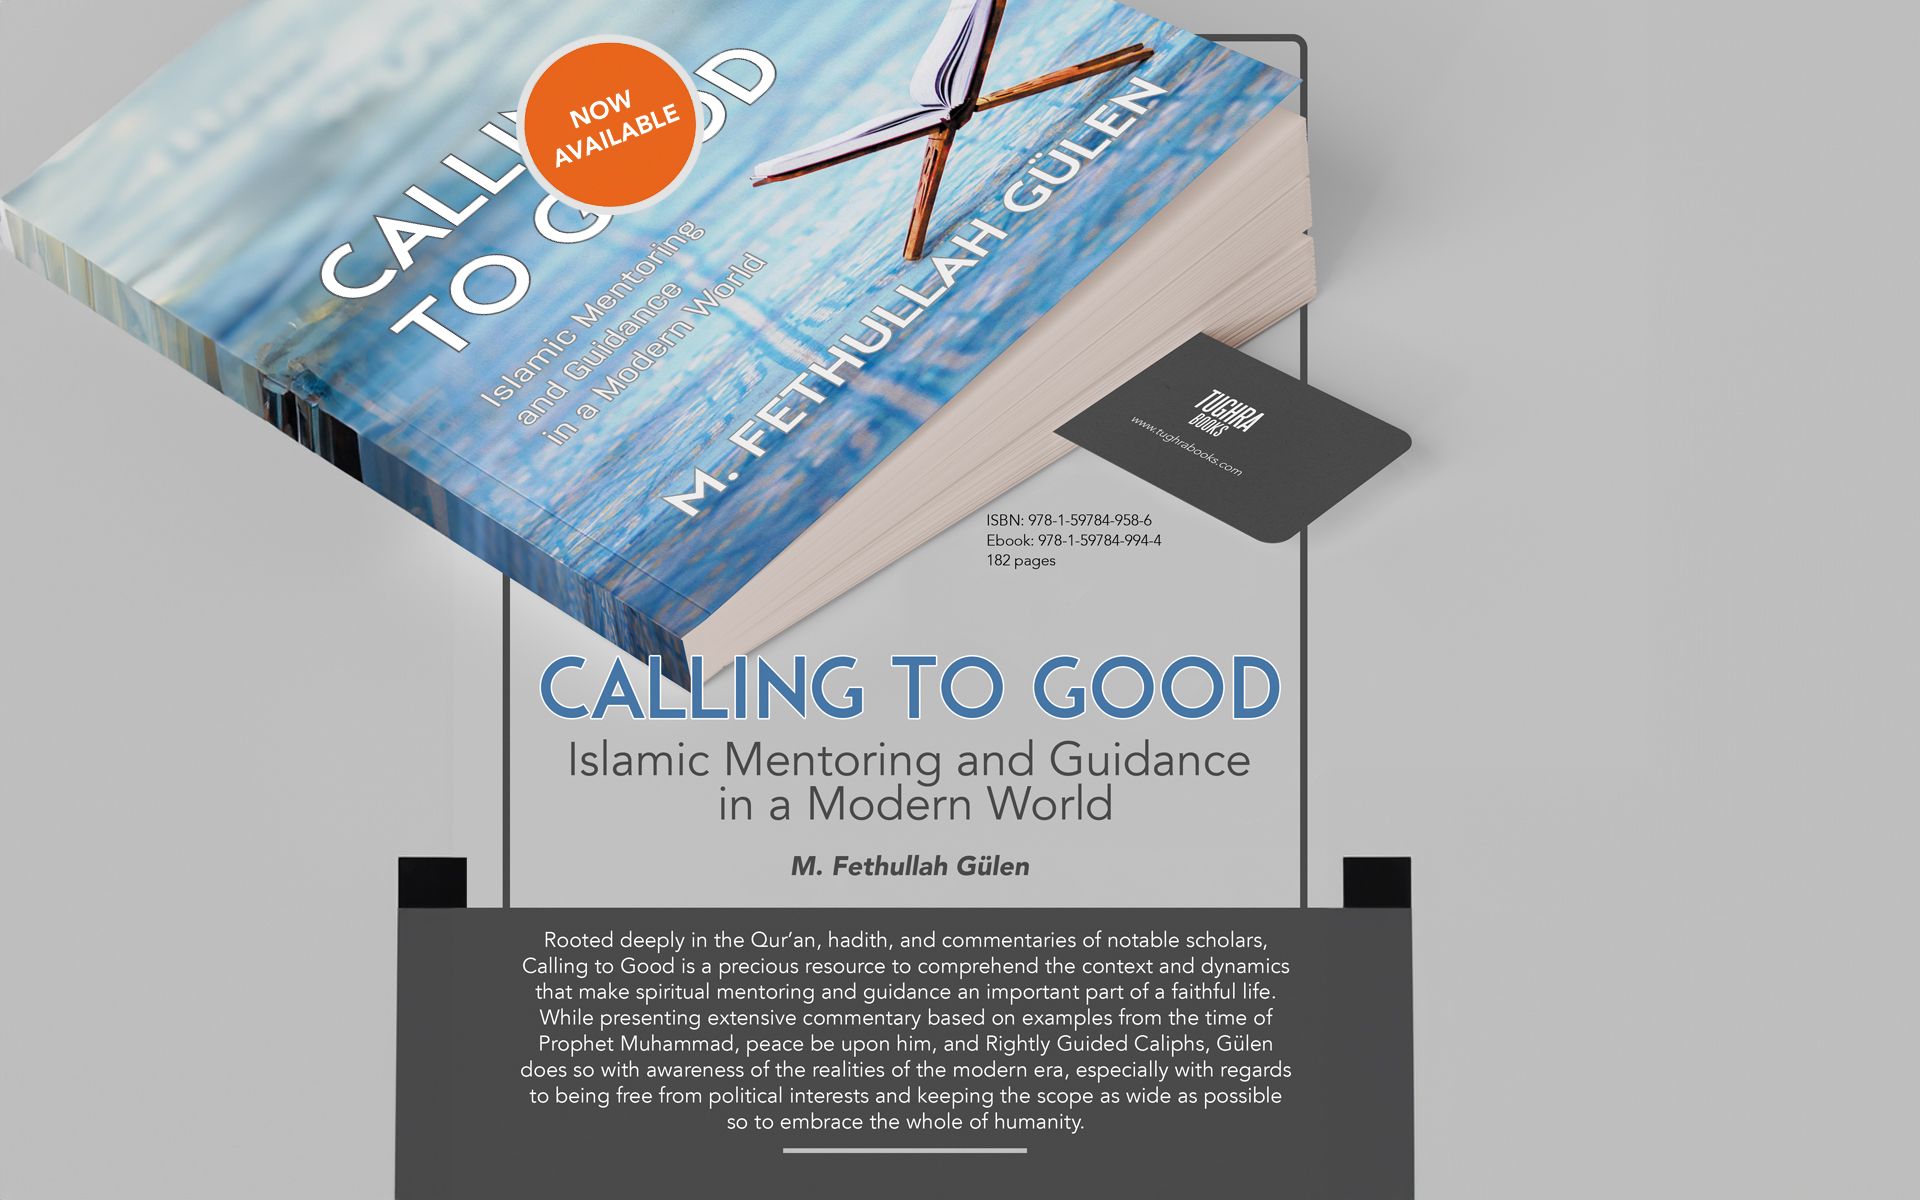 Calling to Good: Islamic Mentoring and Guidance in a Modern World